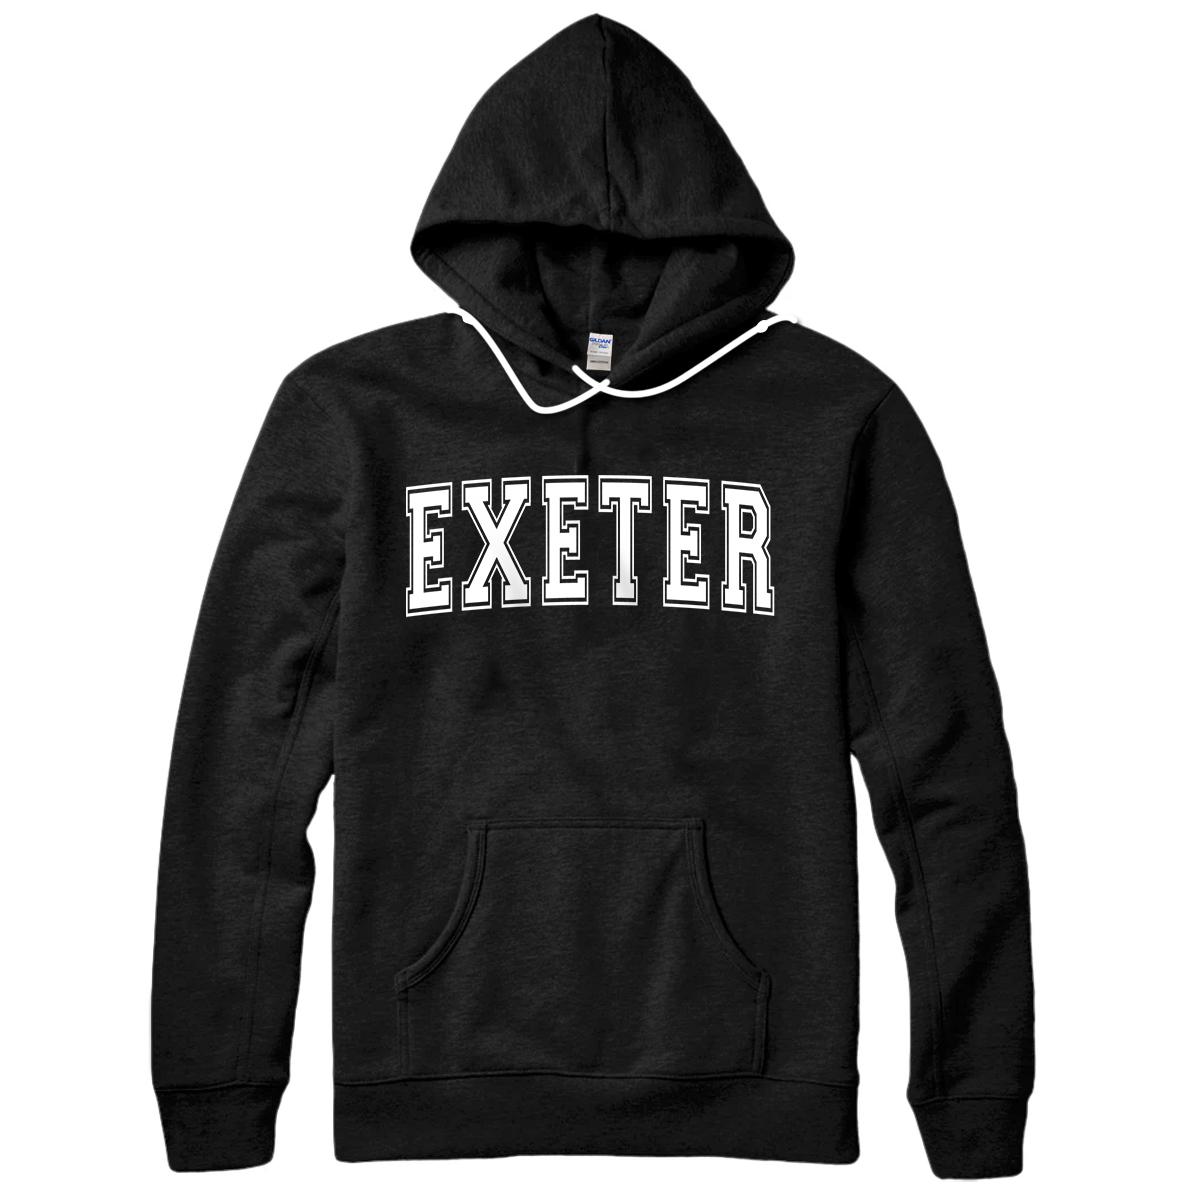 Personalized EXETER CA CALIFORNIA USA Vintage Sports Varsity Style Pullover Hoodie